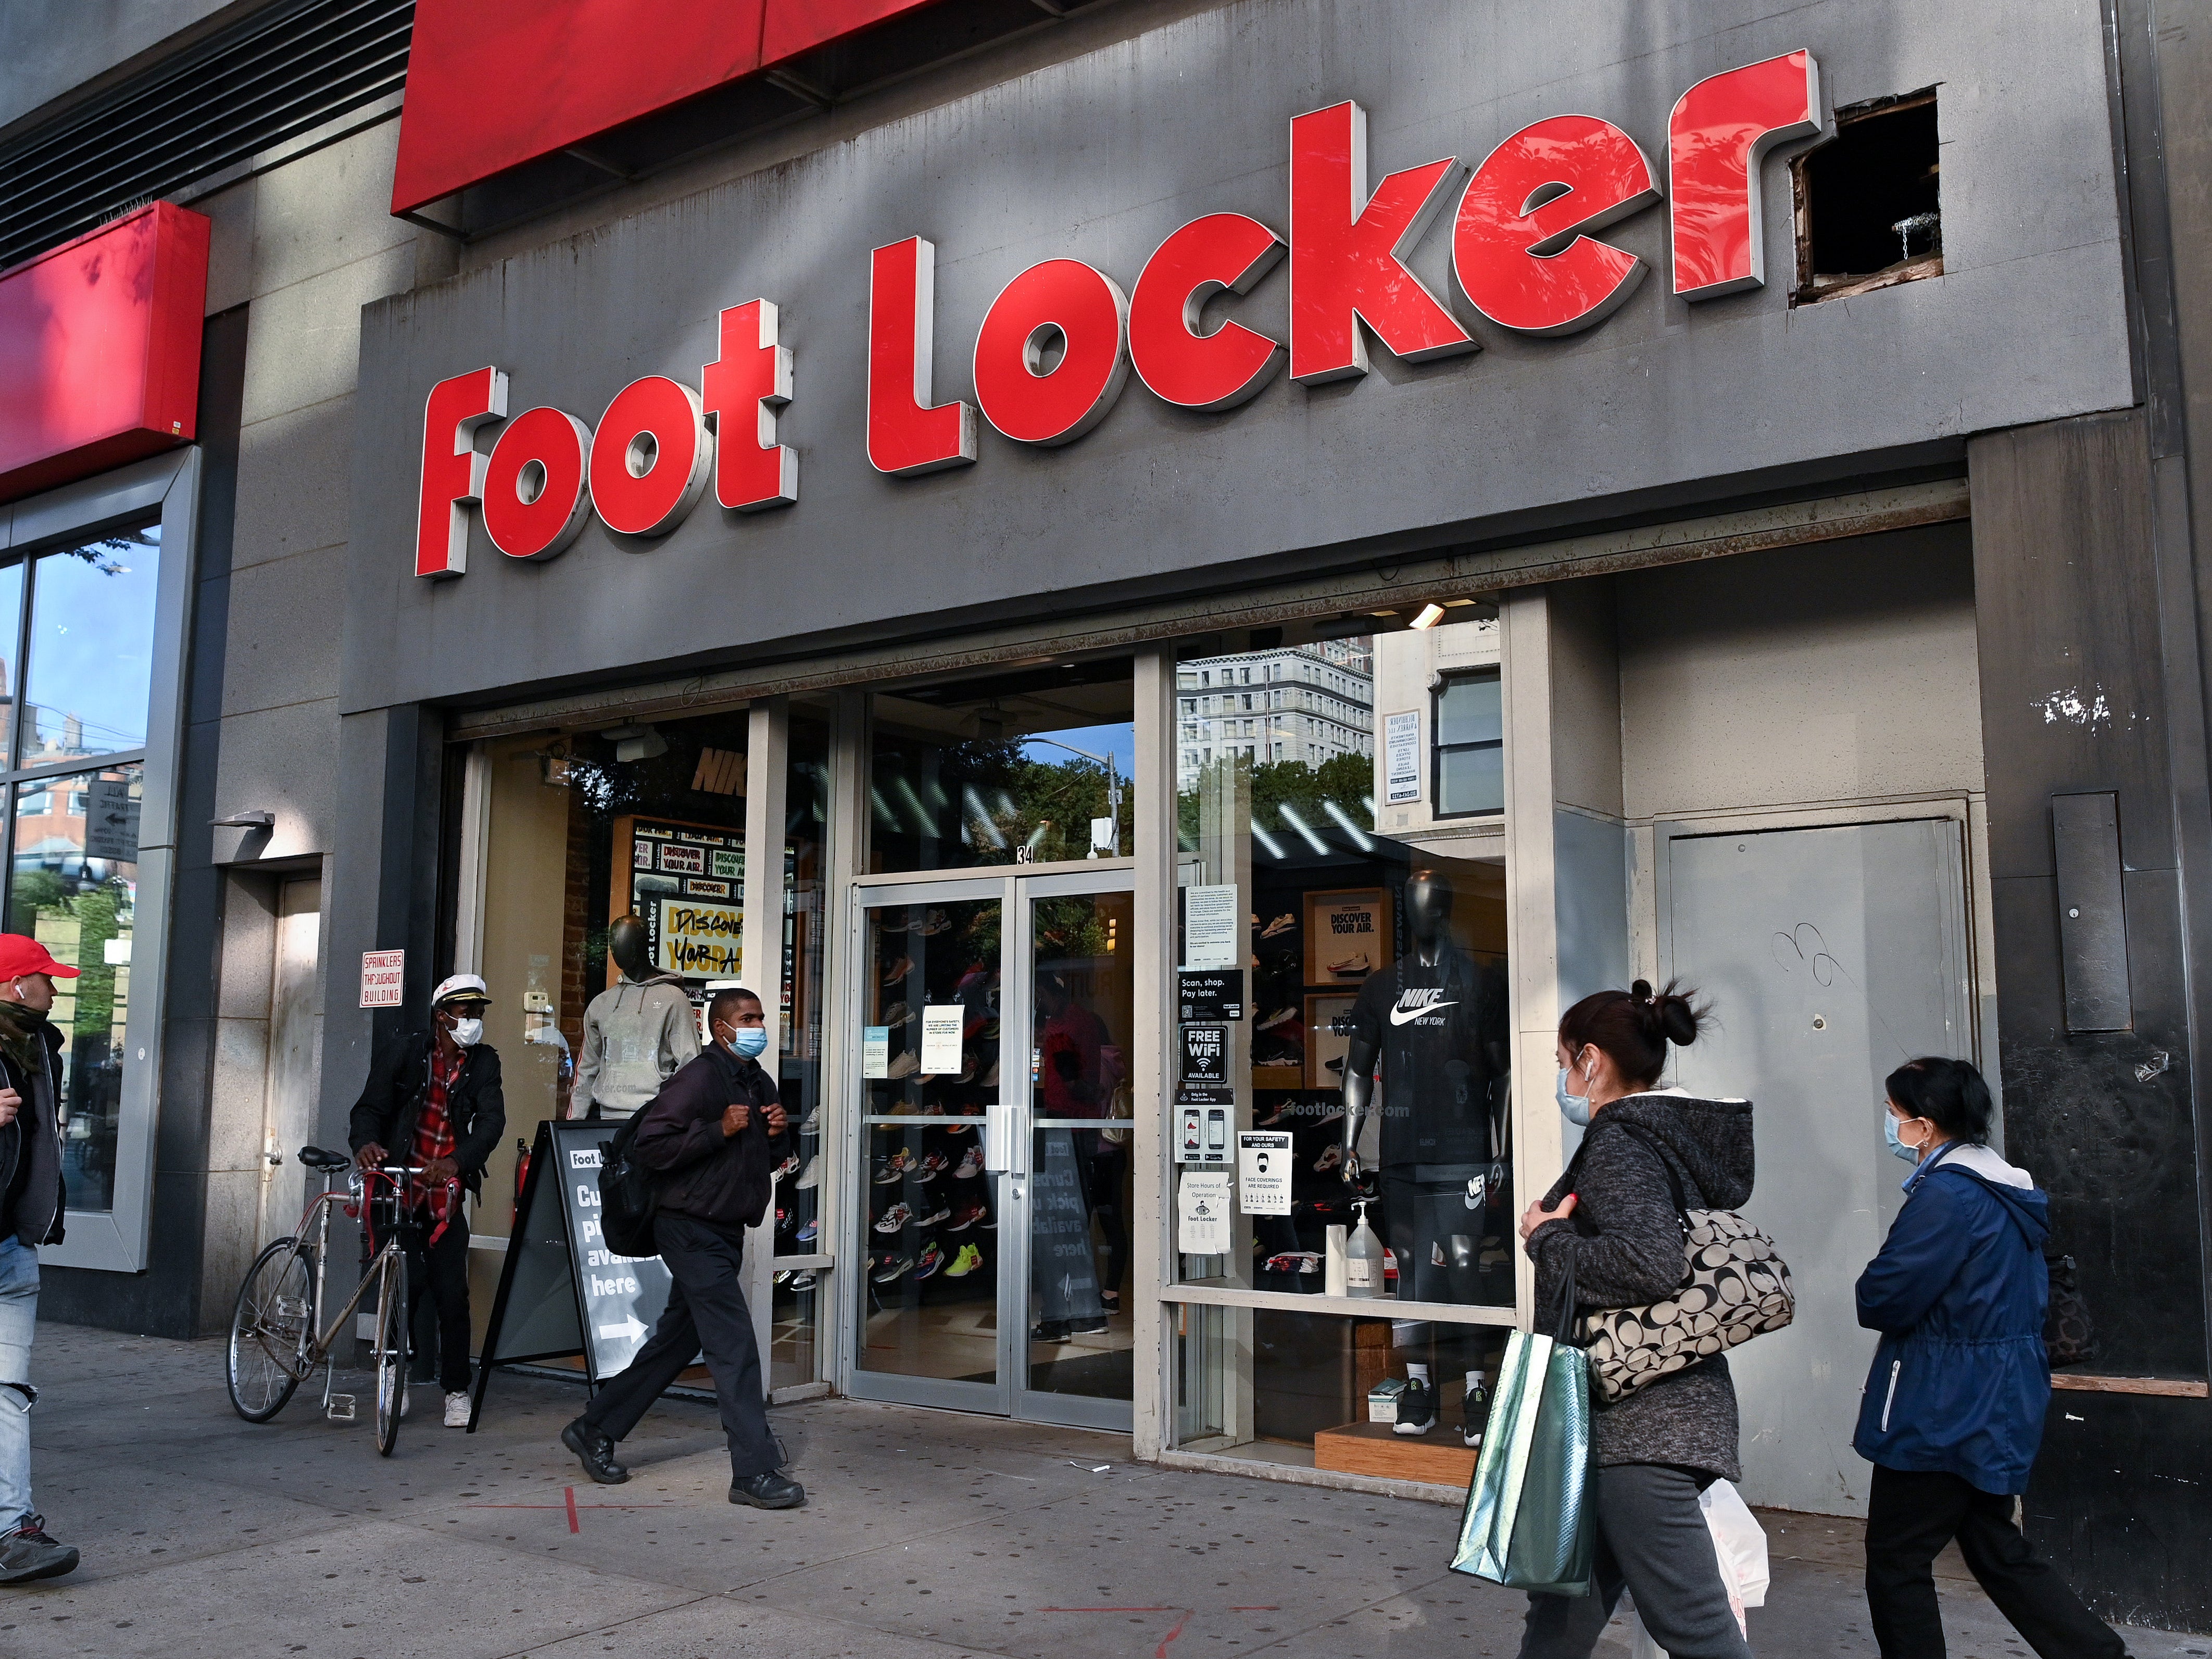 Foot Locker's New Deal With Nike Won't Get Them the Hottest Sneakers